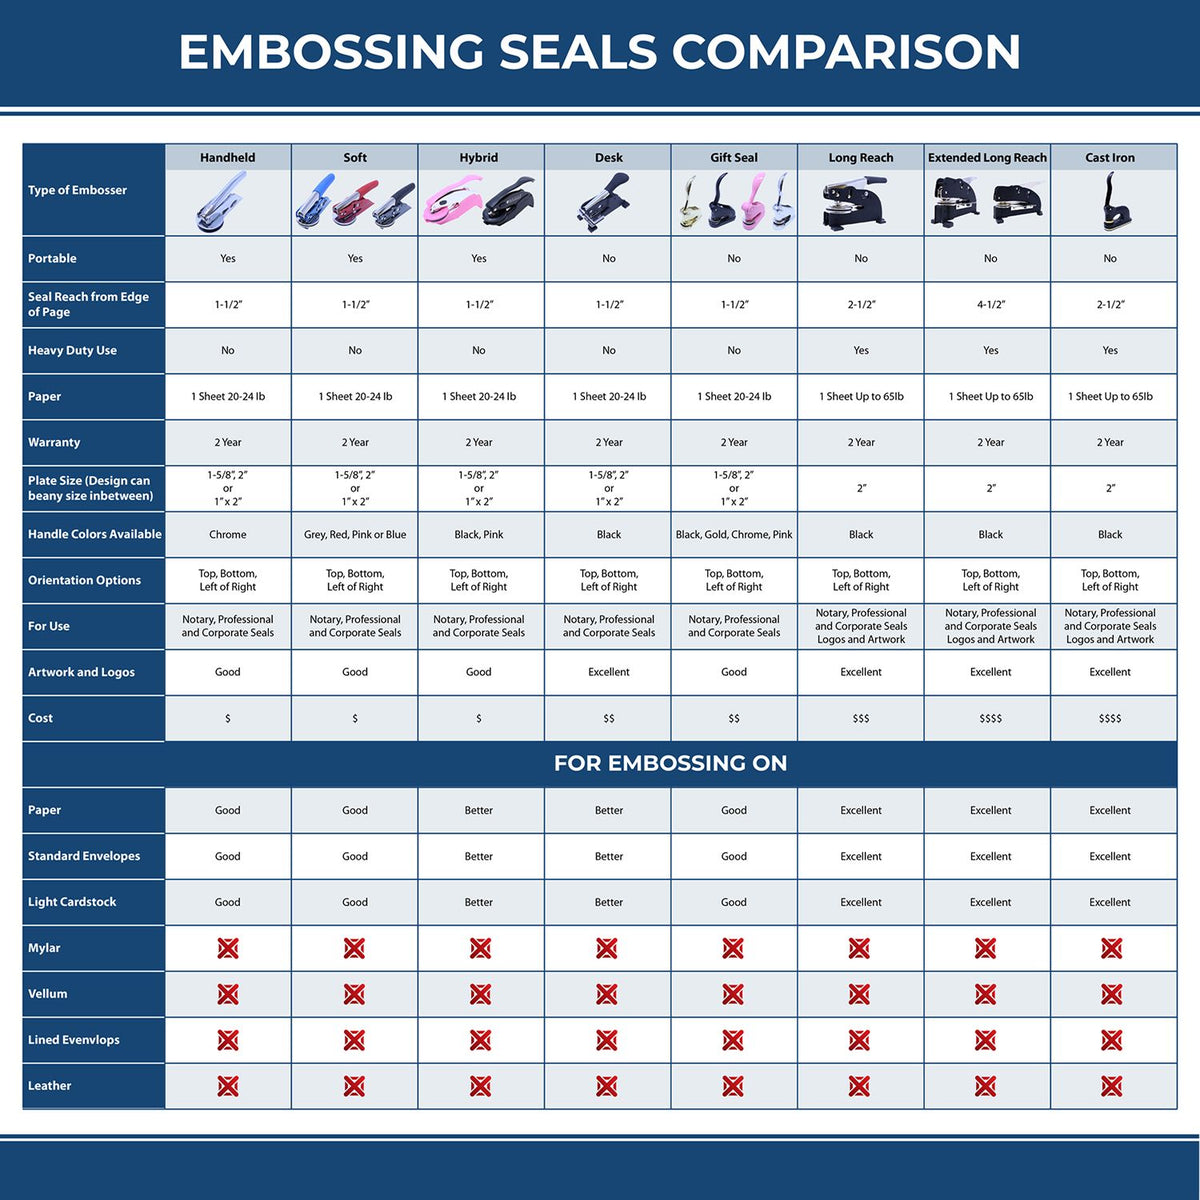 A comparison chart for the different types of mount models available for the State of Illinois Extended Long Reach Geologist Seal